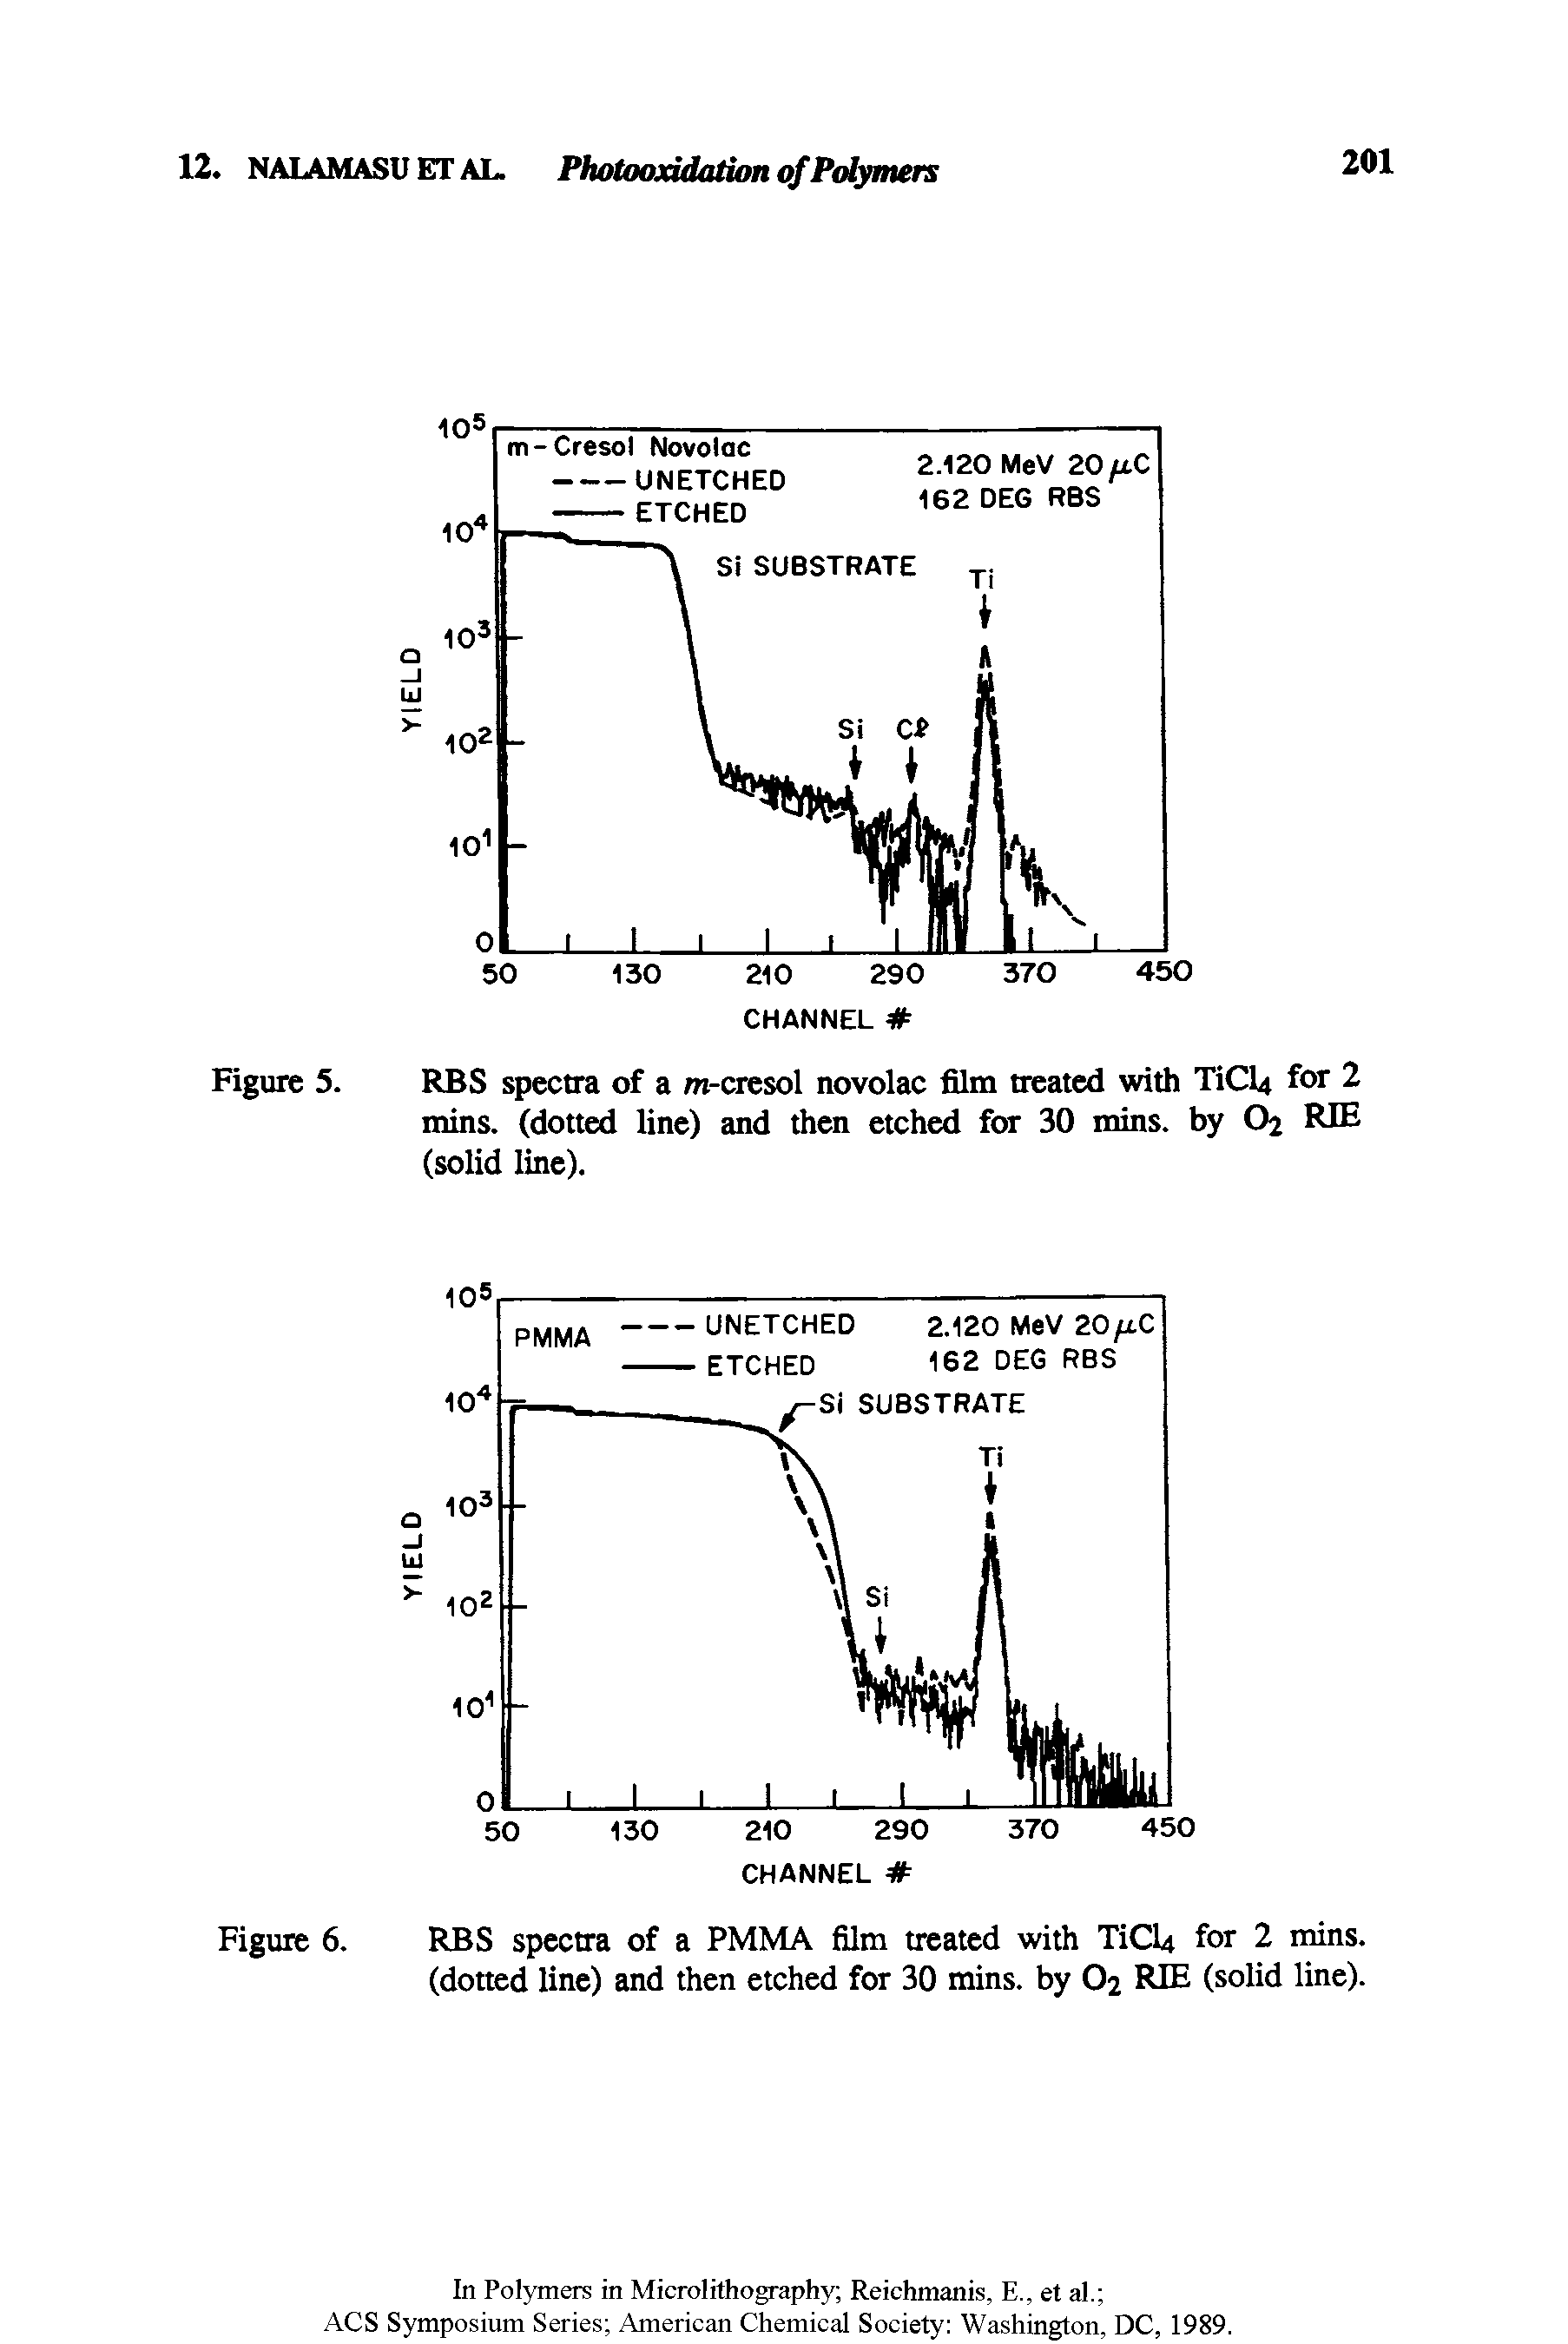 Figure 5. RBS spectra of a m-cresol novolac film treated with TiCU for 2 mins, (dotted line) and then etched for 30 mins, by O2 RIE (solid line).